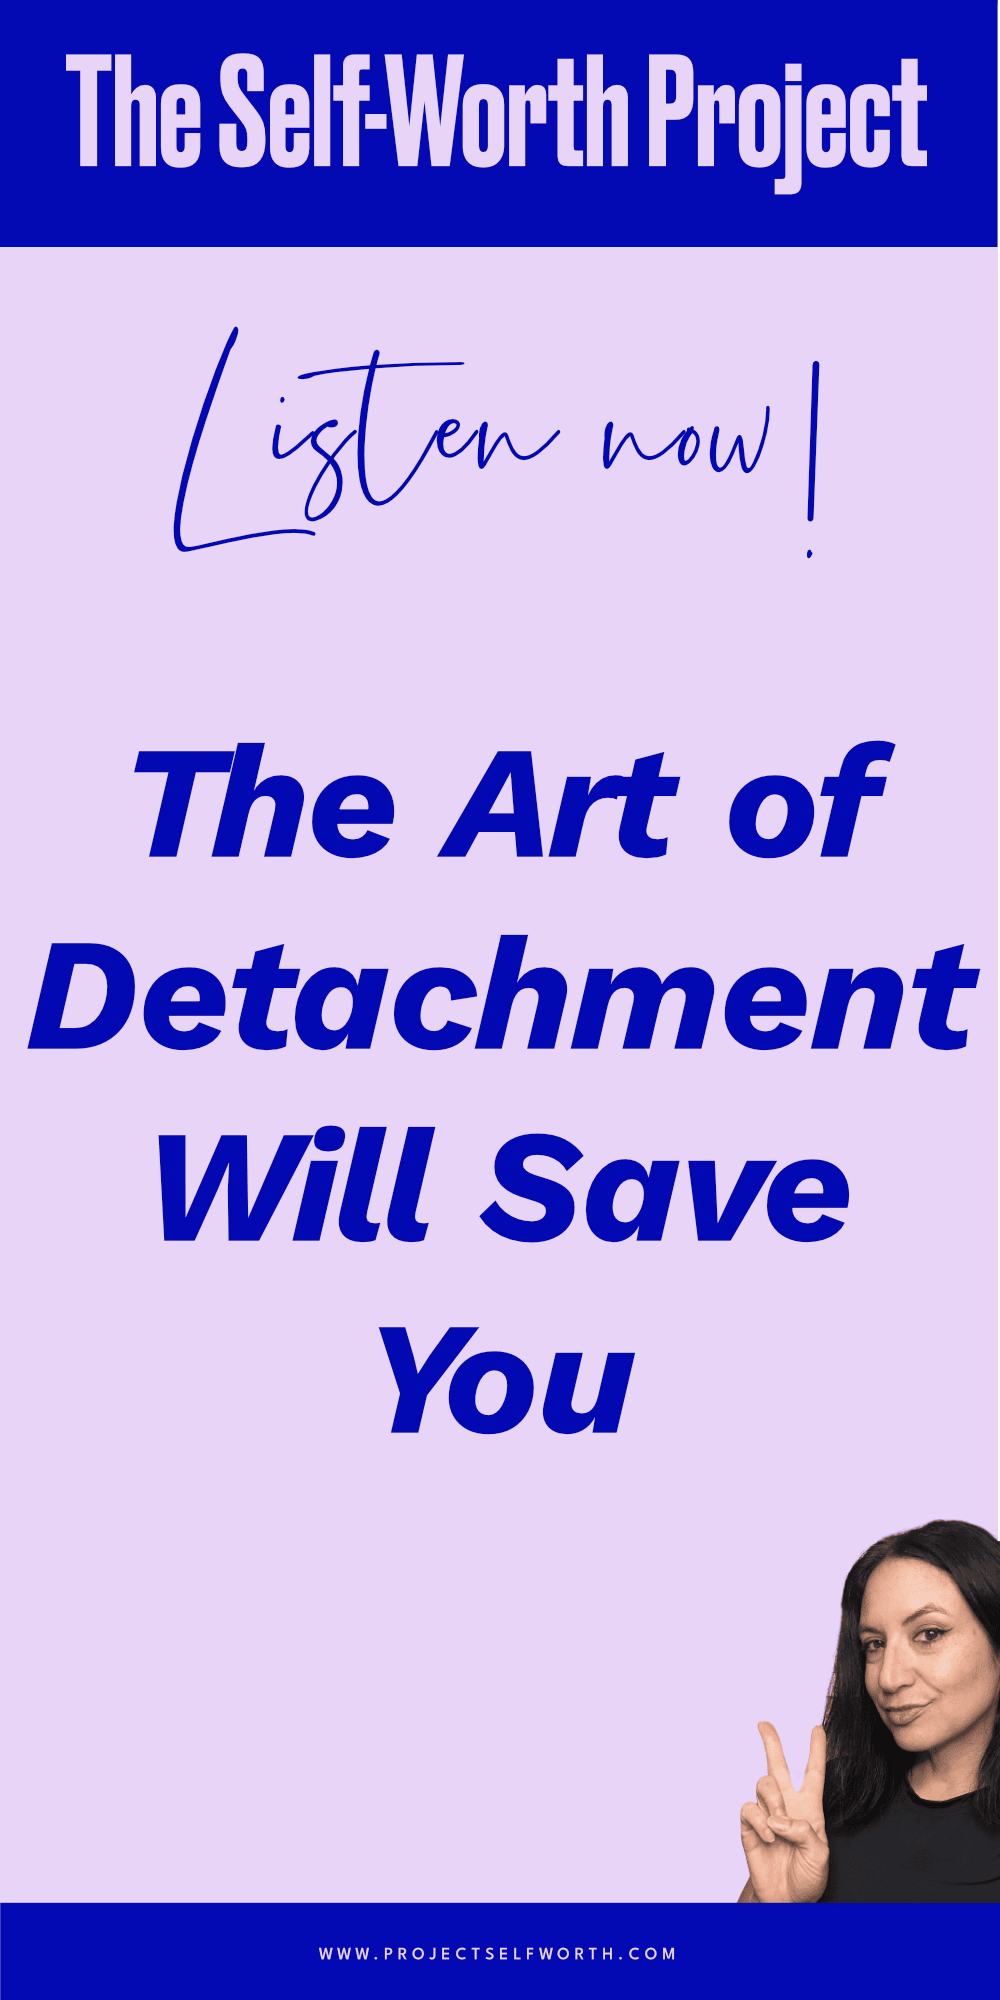 Episode #23: The Art of Detachment Will Save You